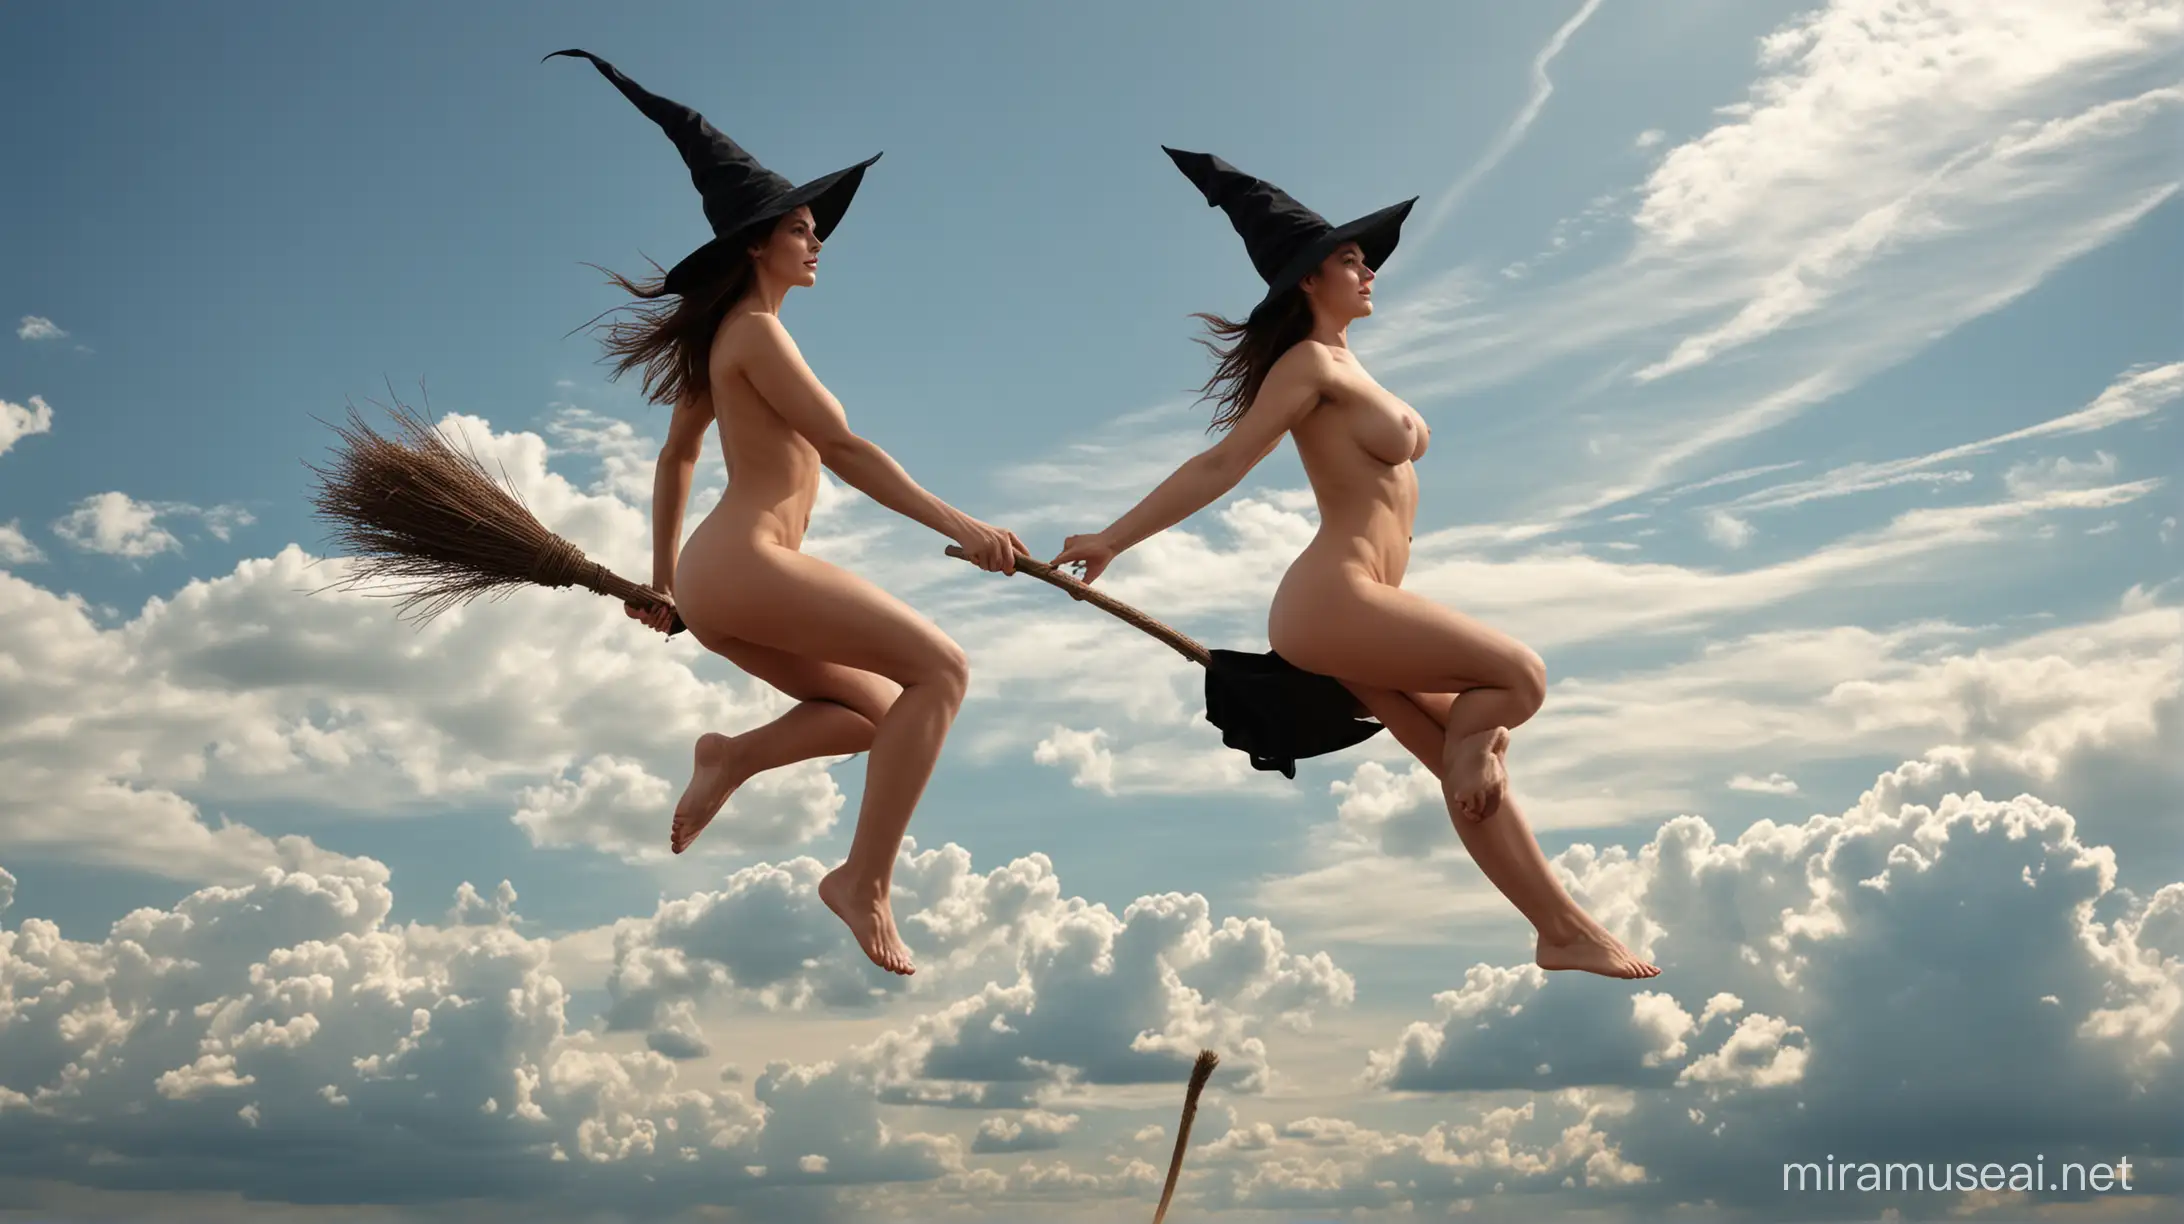 naked woman witch broomstick riding in sky